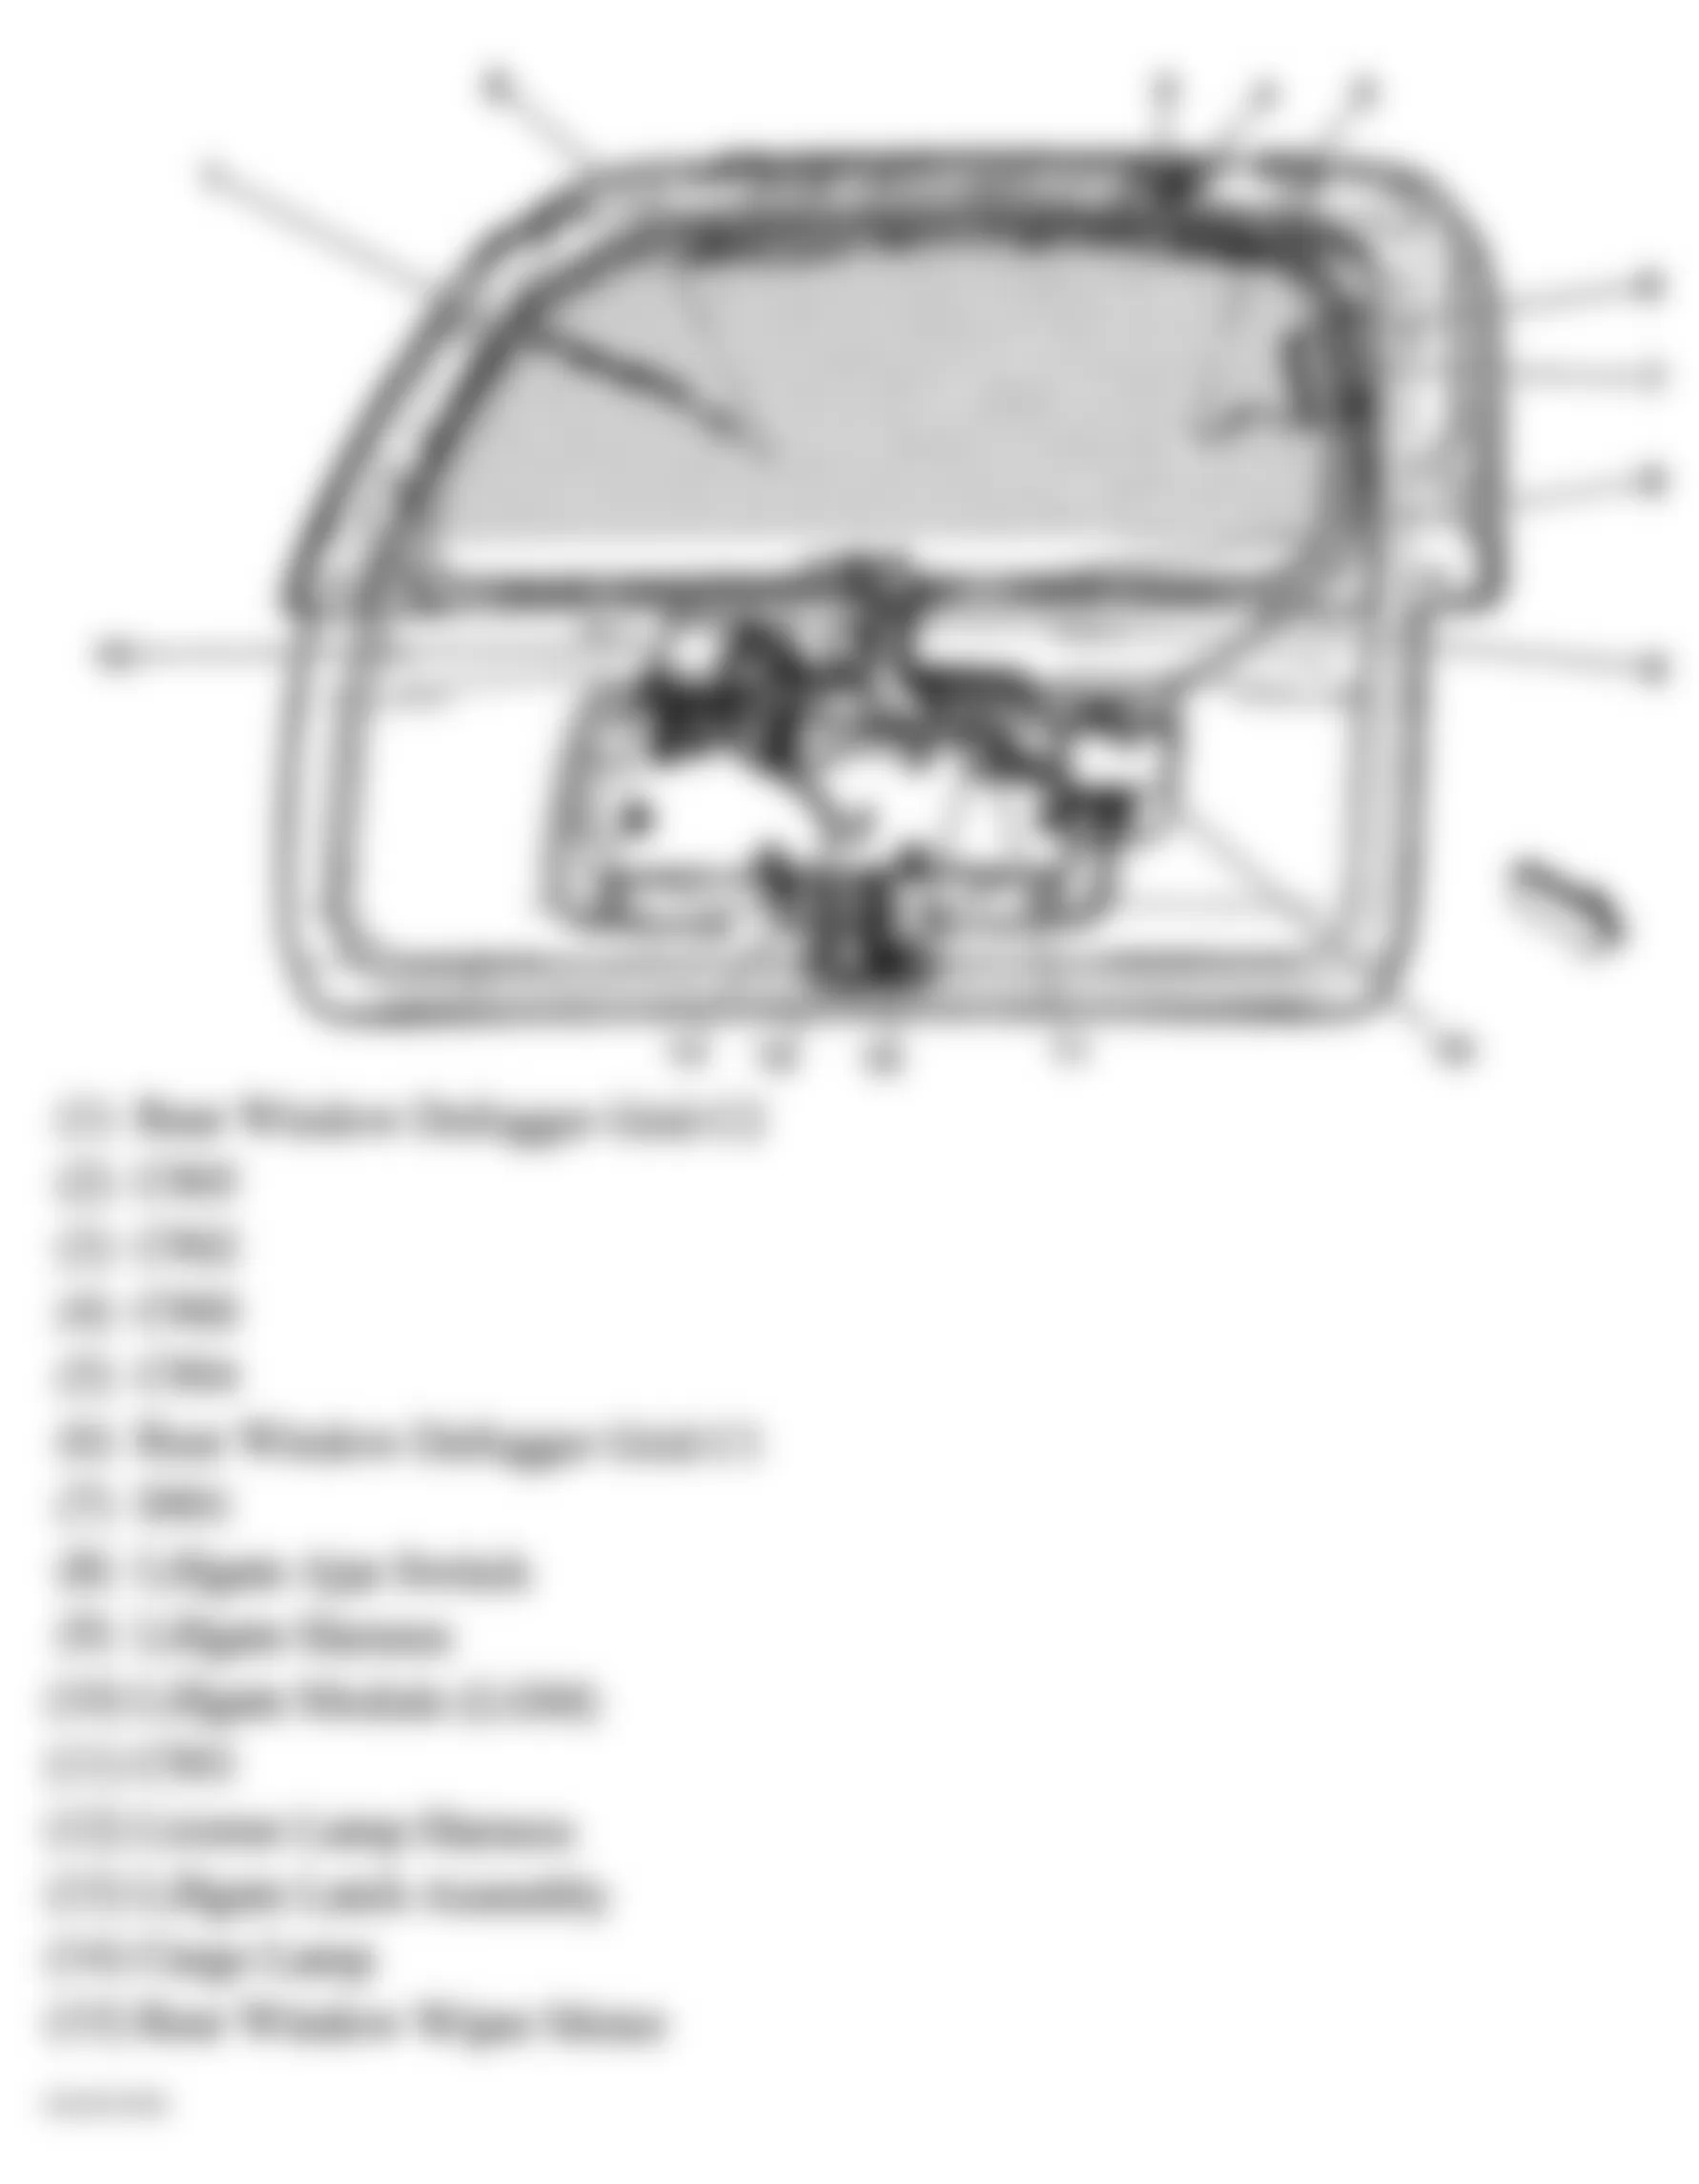 GMC Envoy XUV 2004 - Component Locations -  Liftgate (Except XUV)